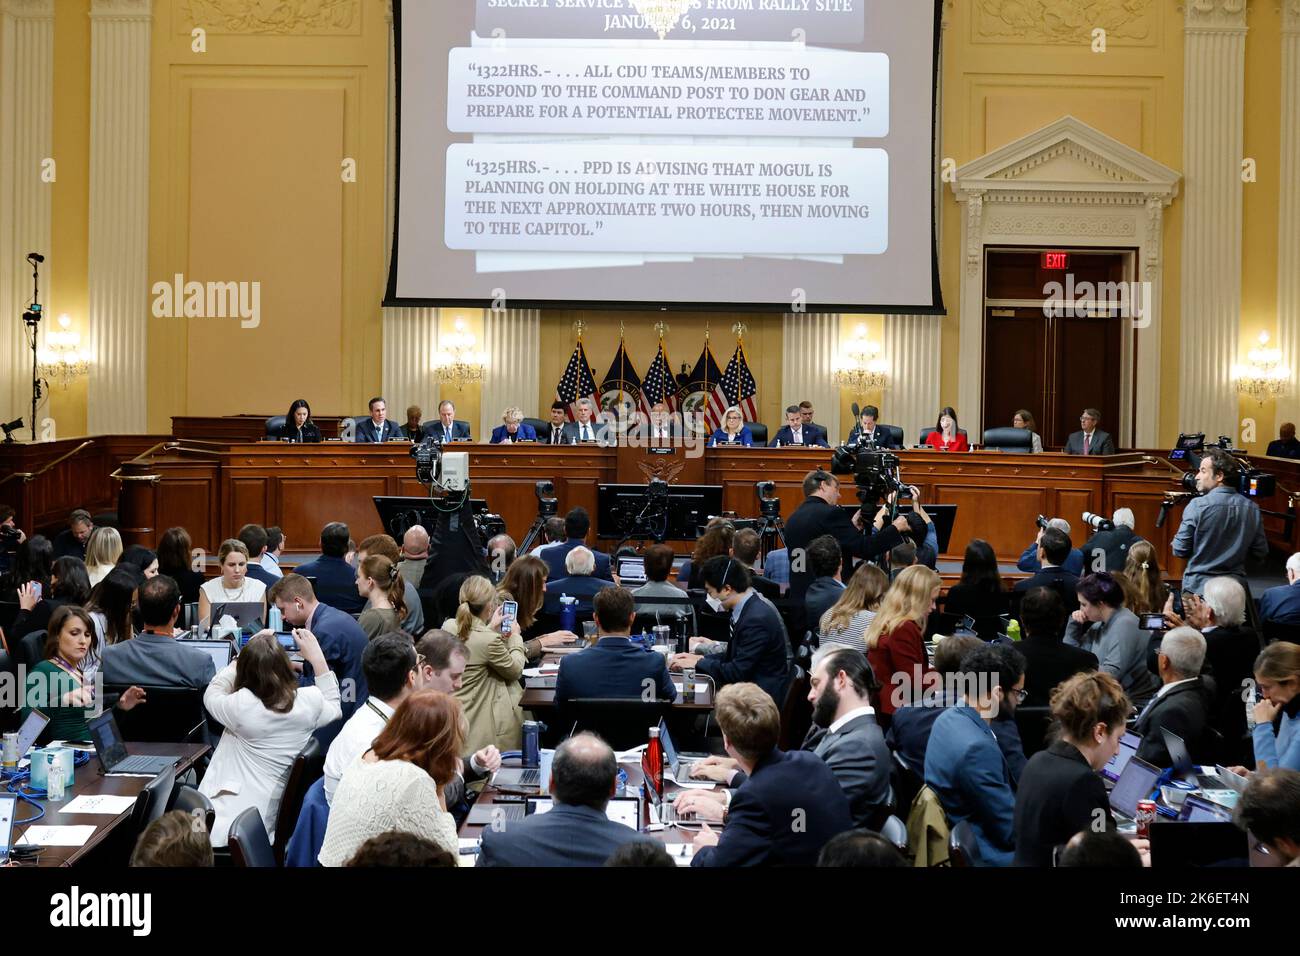 The United States House Select Committee to Investigate the January 6 Attack on the U.S. Capitol displays U.S. Secret Service messages indicating former President Donald Trump's intention to march to the U.S. Capitol with protestors on January 6, 2021 during a video shown during the committee's public hearing on Capitol Hill in Washington, U.S., October 13, 2022. Credit: Jonathan Ernst/Pool via CNP /MediaPunch Stock Photo